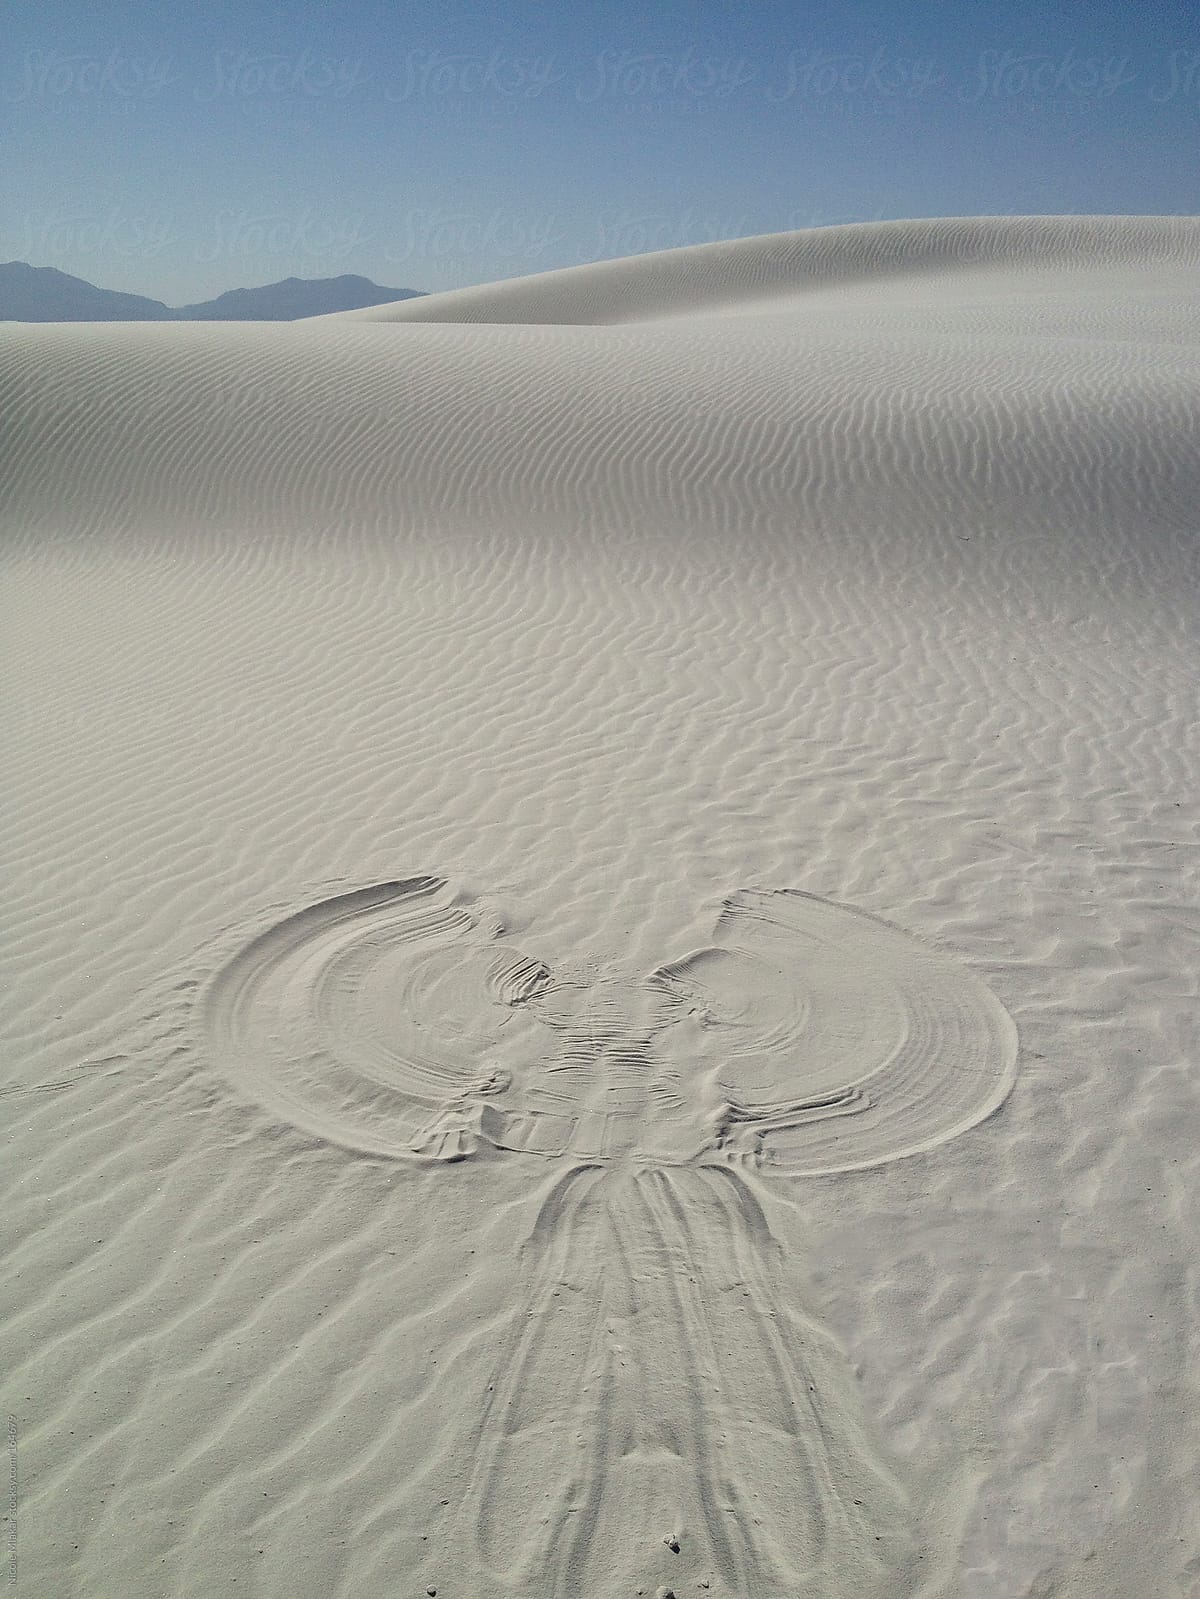 Sand angel made at White Sands, New Mexico